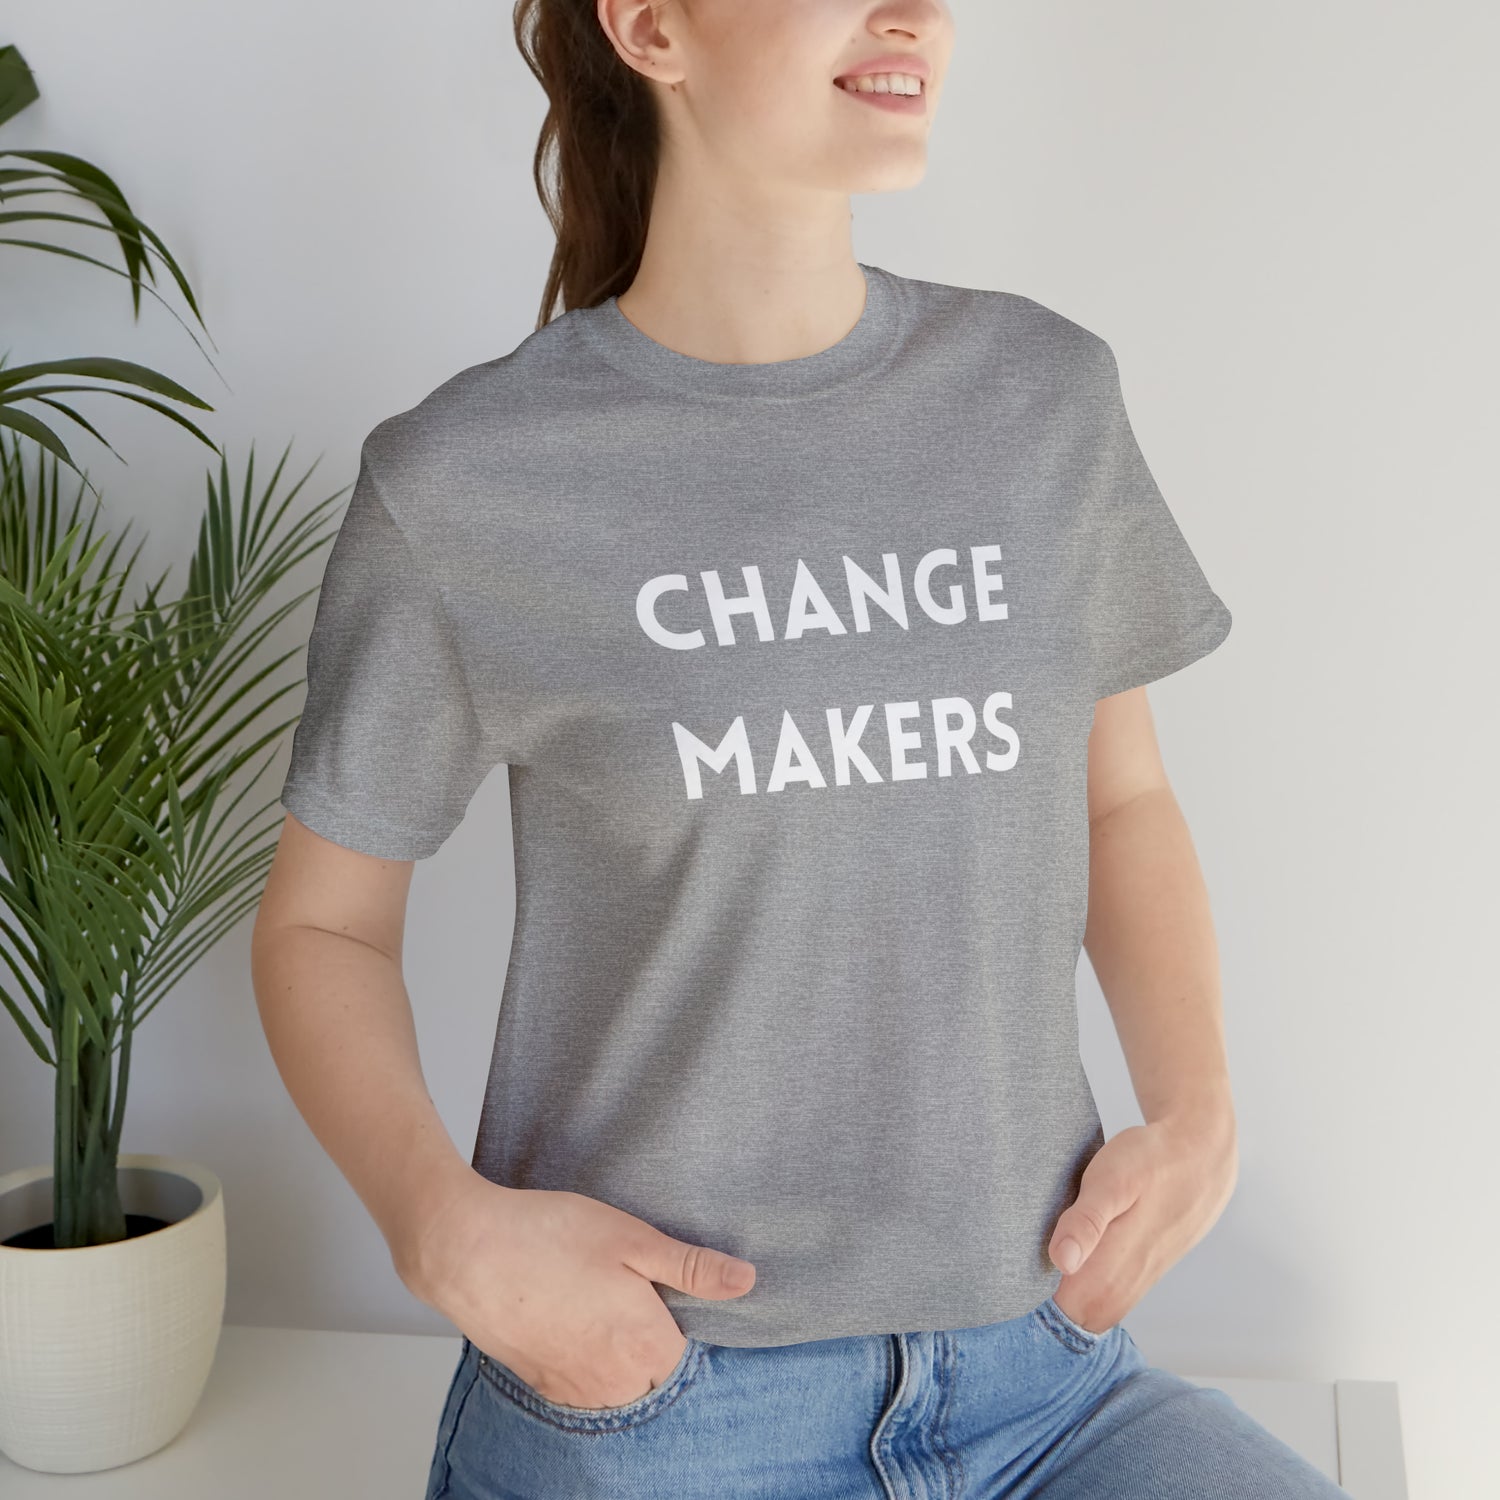 Inspirational T-Shirt About Change | For Change Maker Athletic Heather T-Shirt Petrova Designs